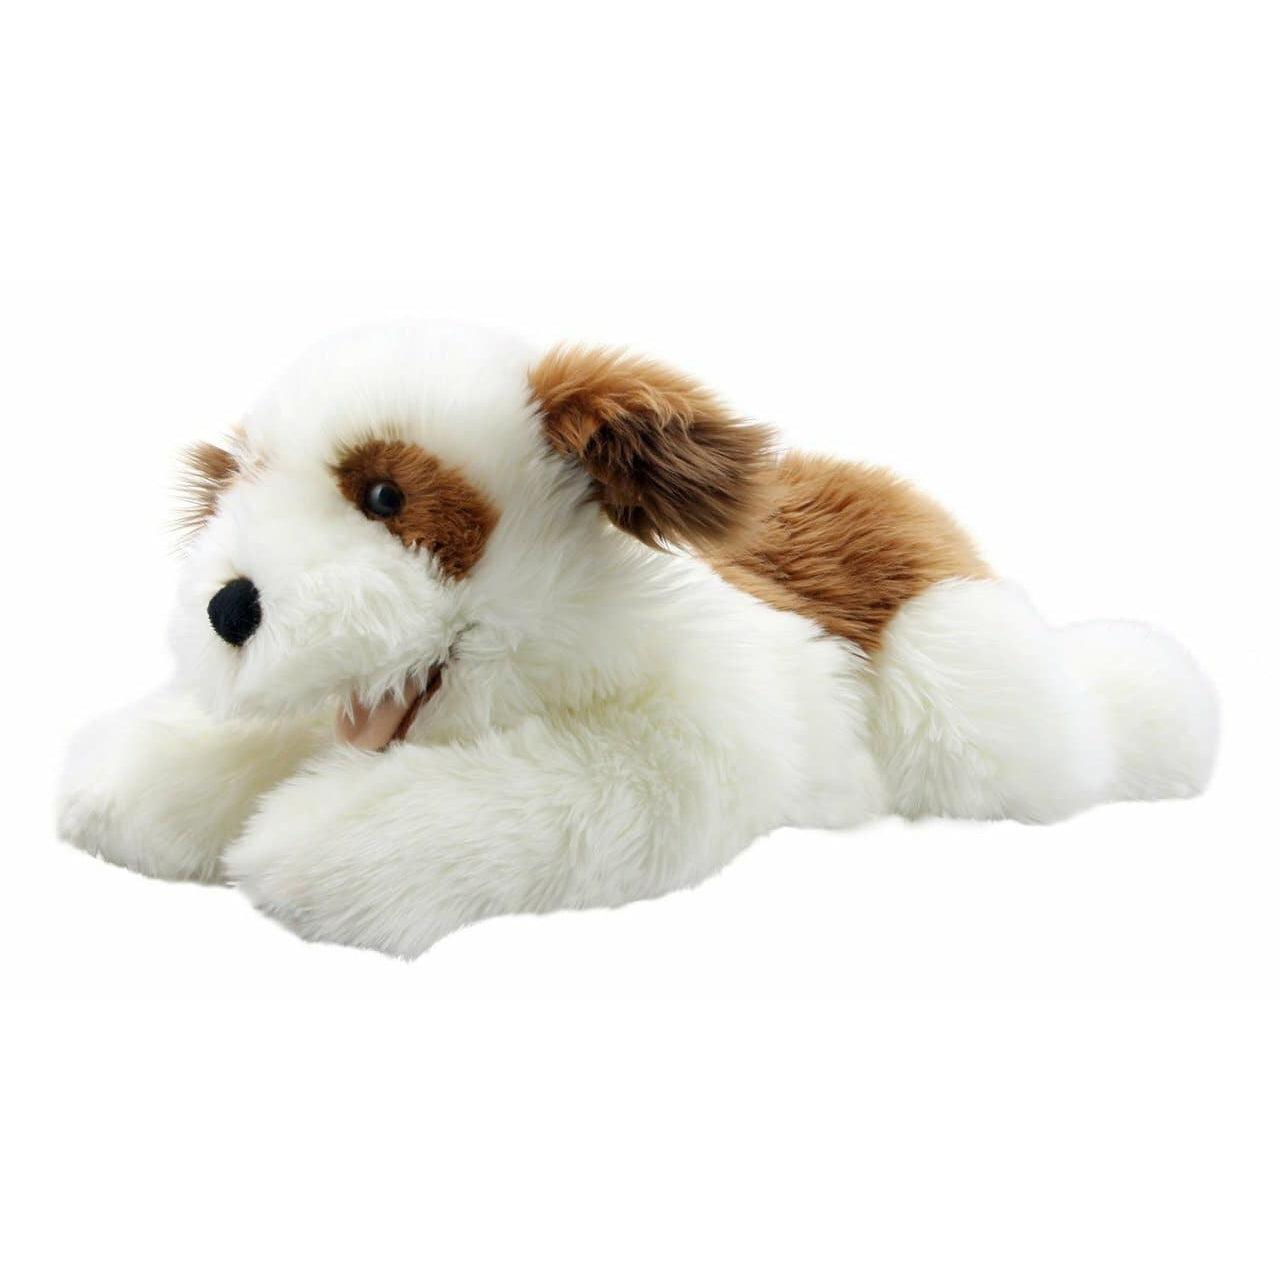 The Puppet Company-Full Bodied Puppet - Dog - Brown & White-PC001824-Legacy Toys